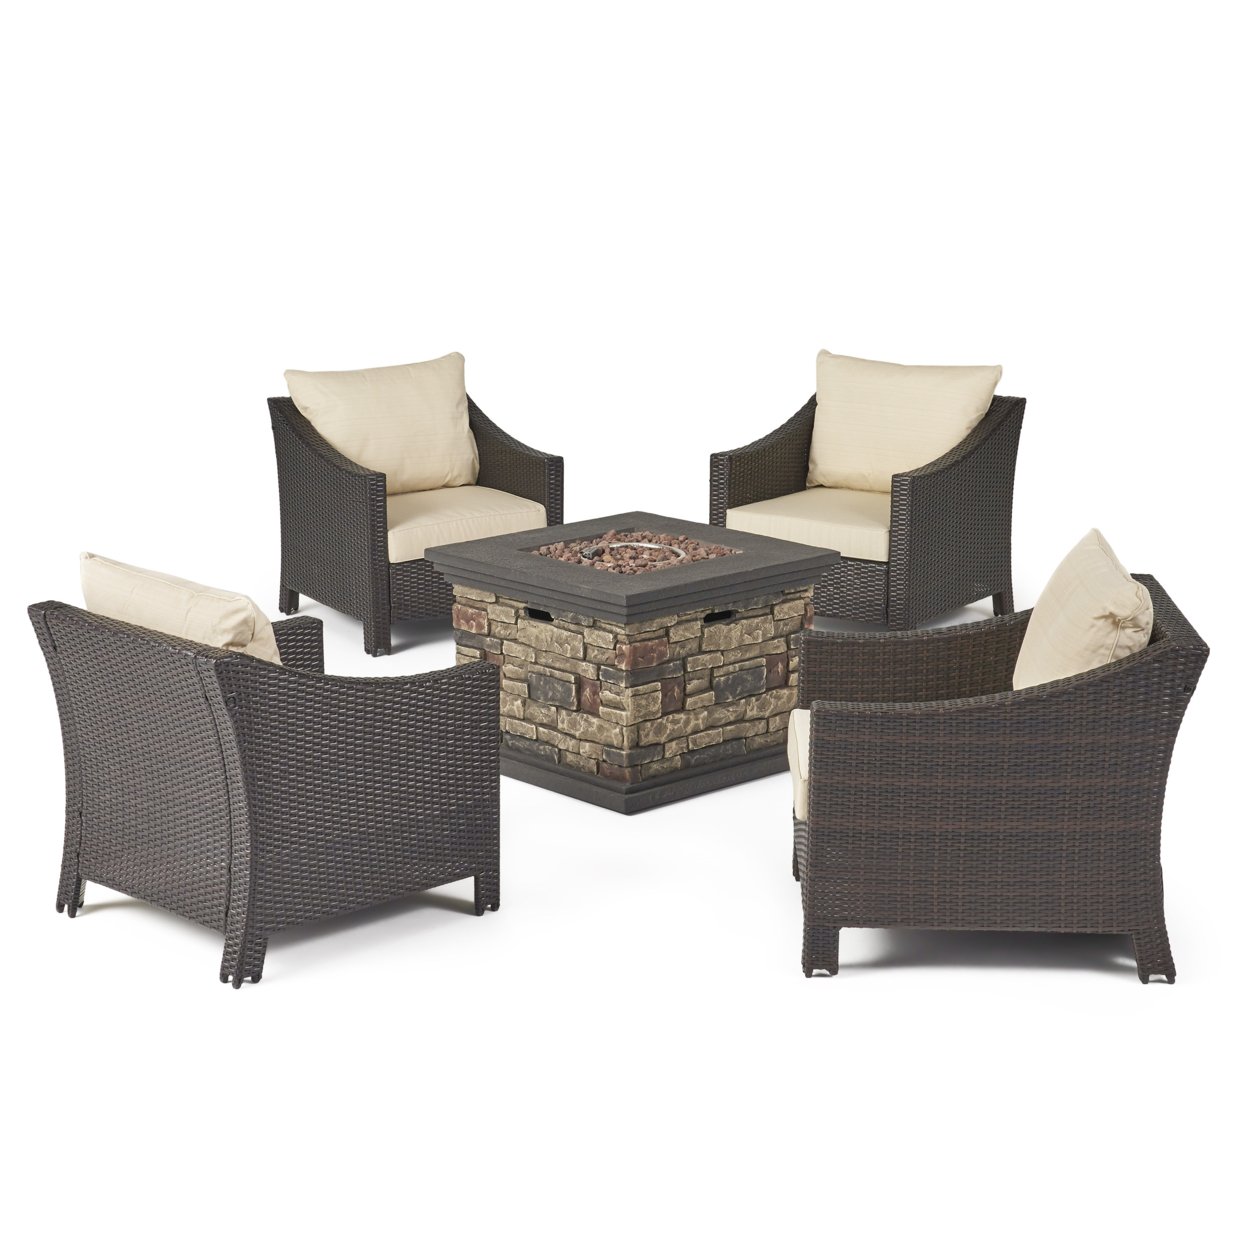 Andrew Outdoor 5 Piece Gray Wicker Chat Set With Stone Finished Fire Pit - Beige